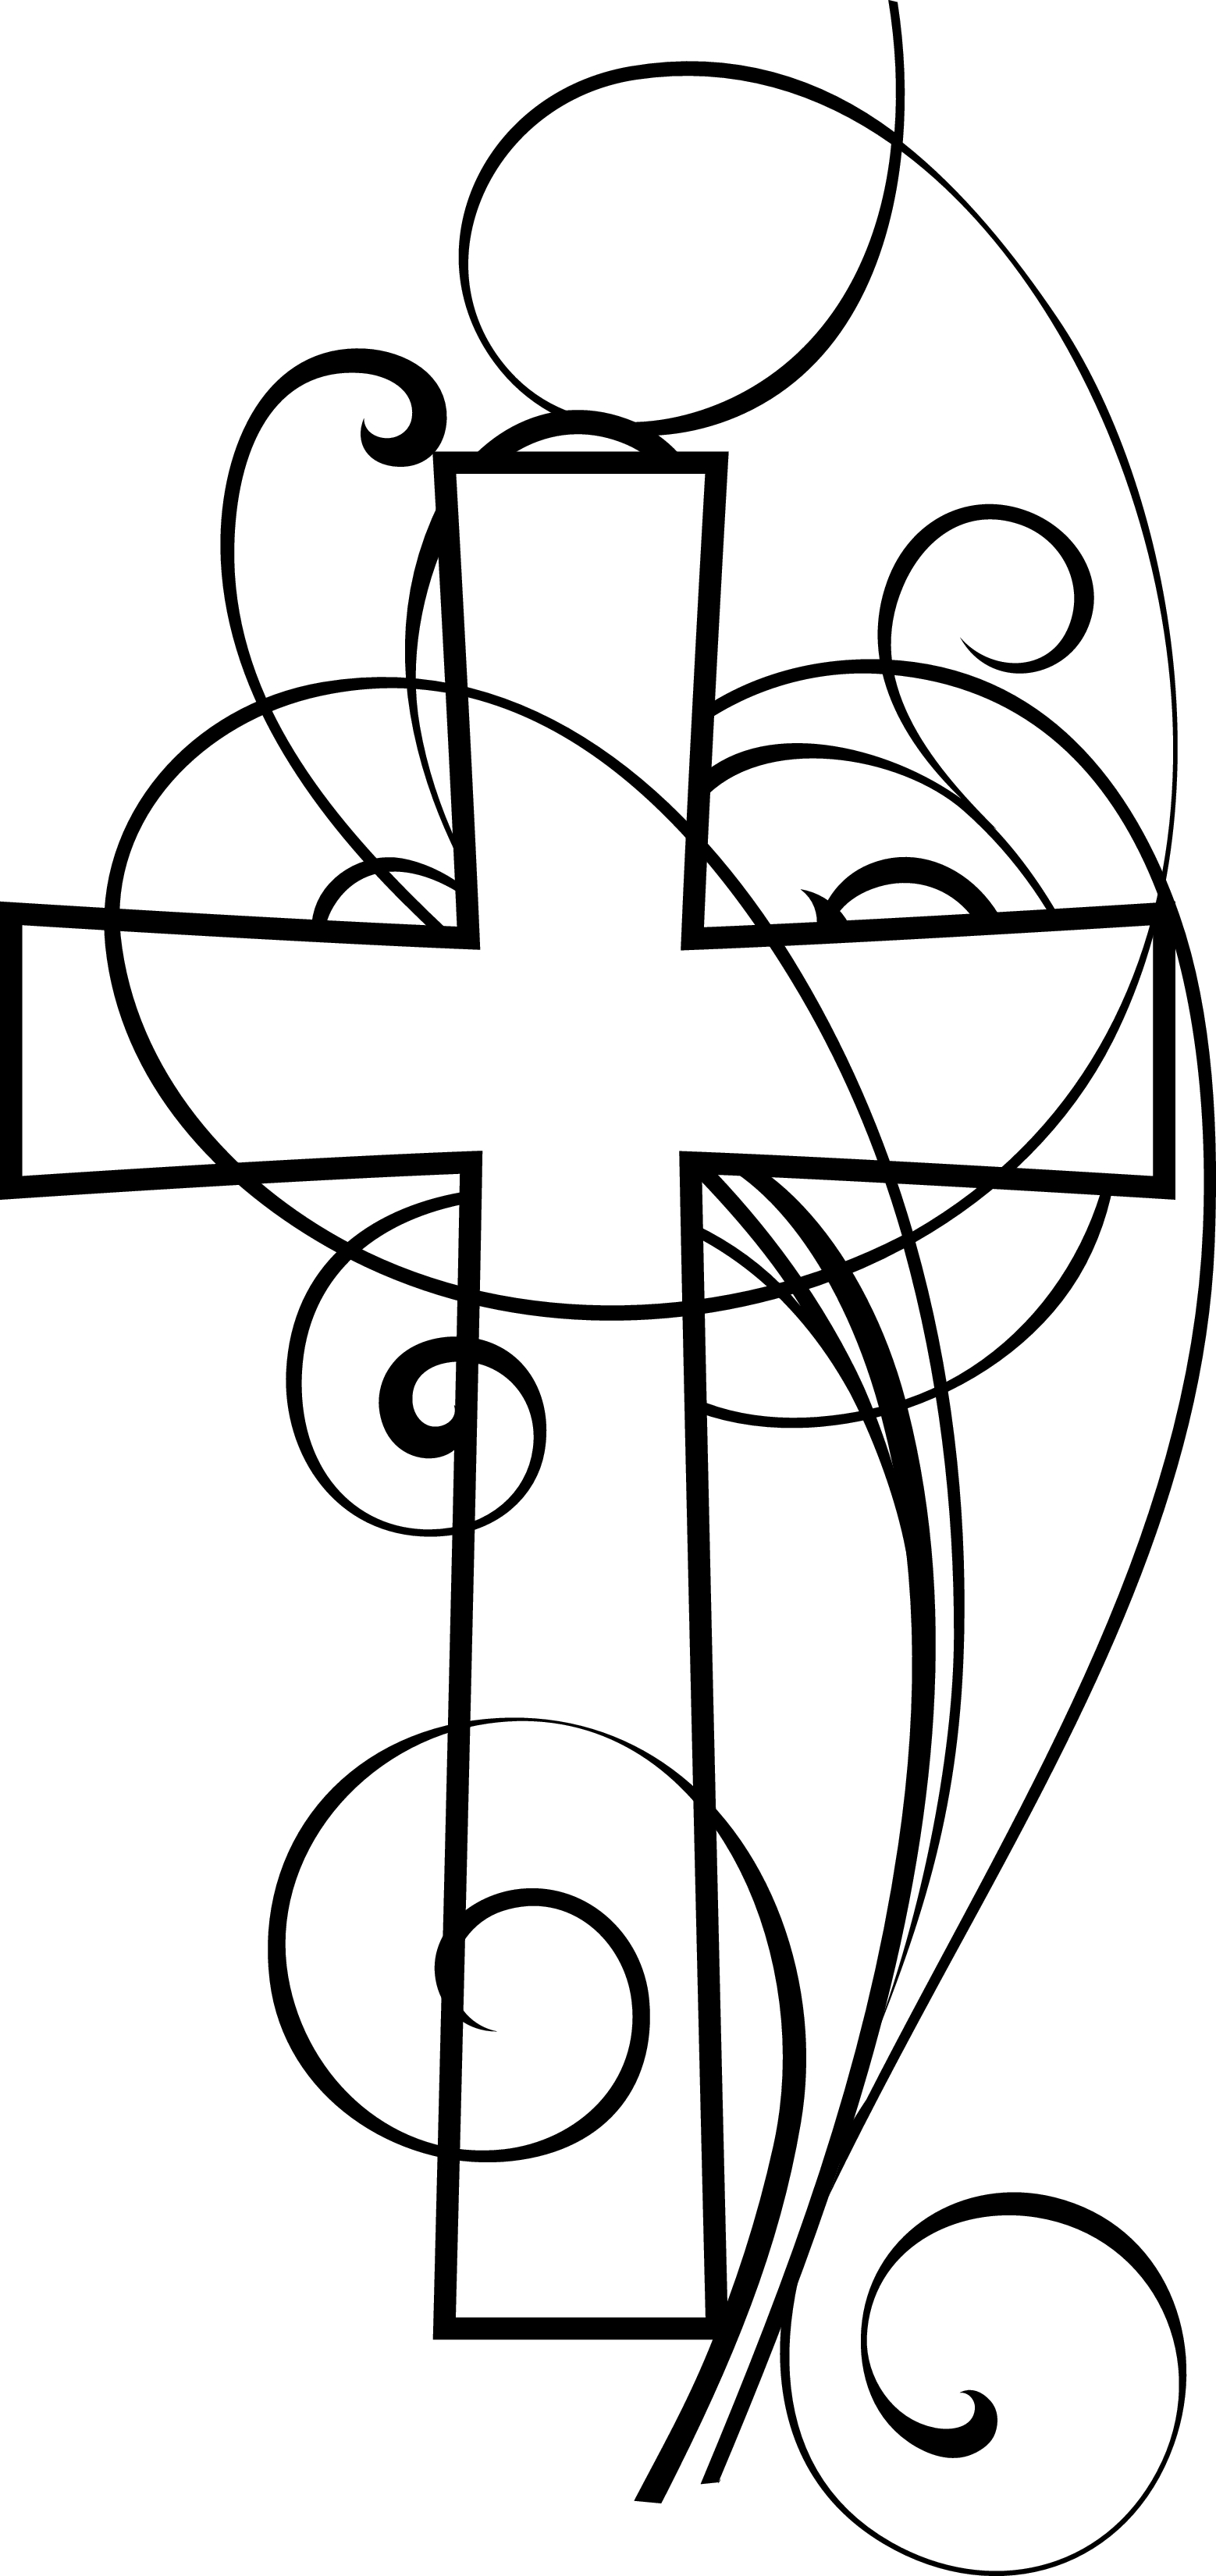 Church Clipart Black And White | Clipart Panda - Free Clipart Images